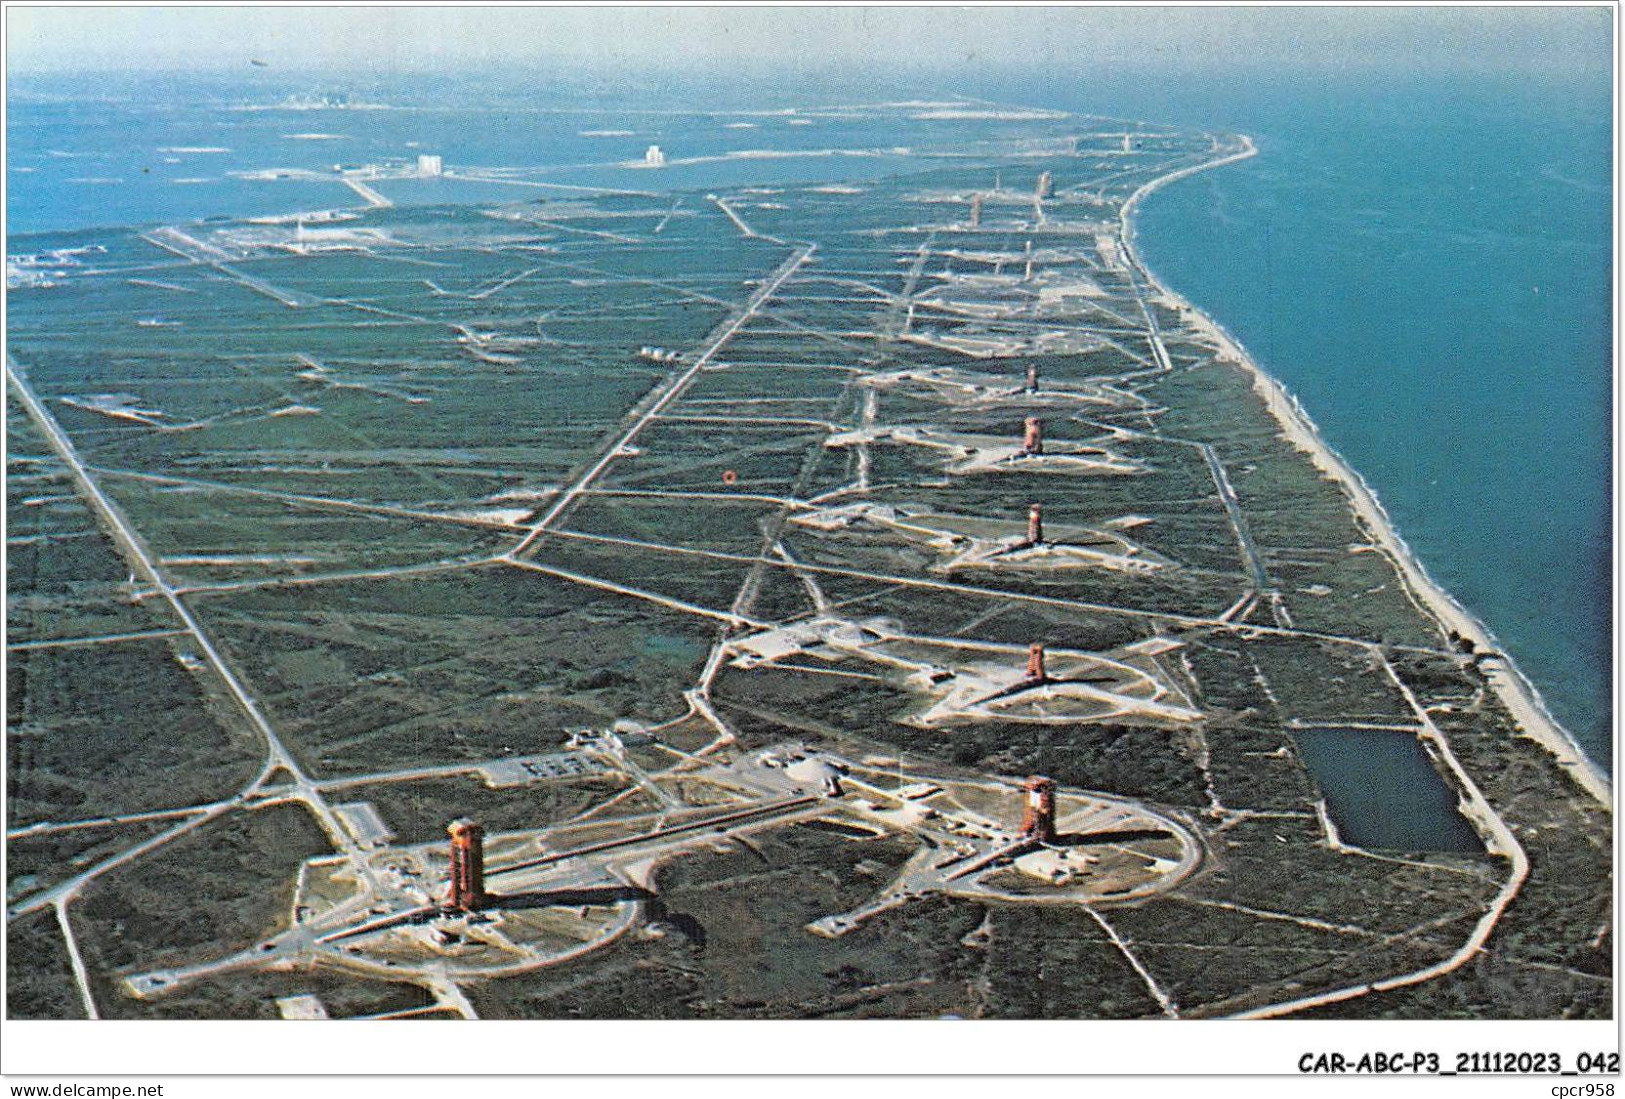 CAR-ABCP3-0205 - AVIATION - JOHN F-KENNEDY SPACE CENTER - N-A-S-A - OVERALL AERIAL VIEW OF MISSILE ROW LOOKING NORTH - Piloten